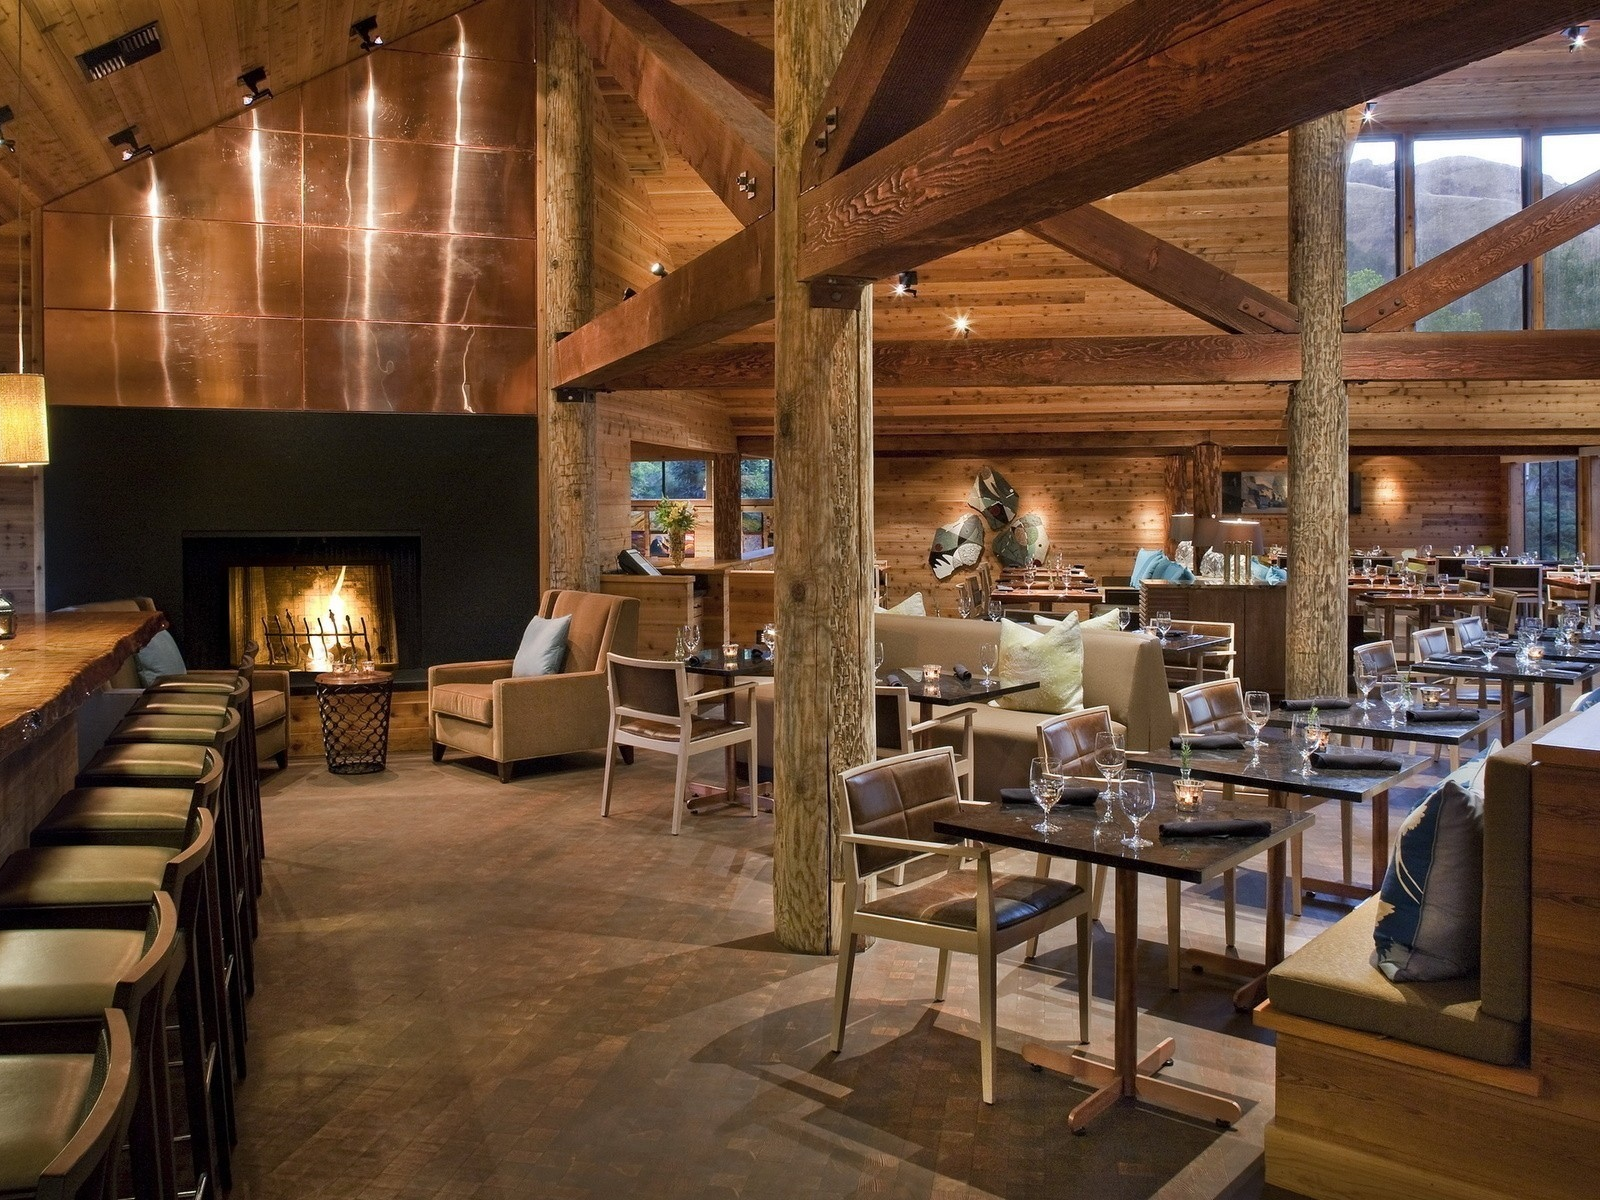 fireplace, chairs, bar, lights, tables, wine glasses, wood